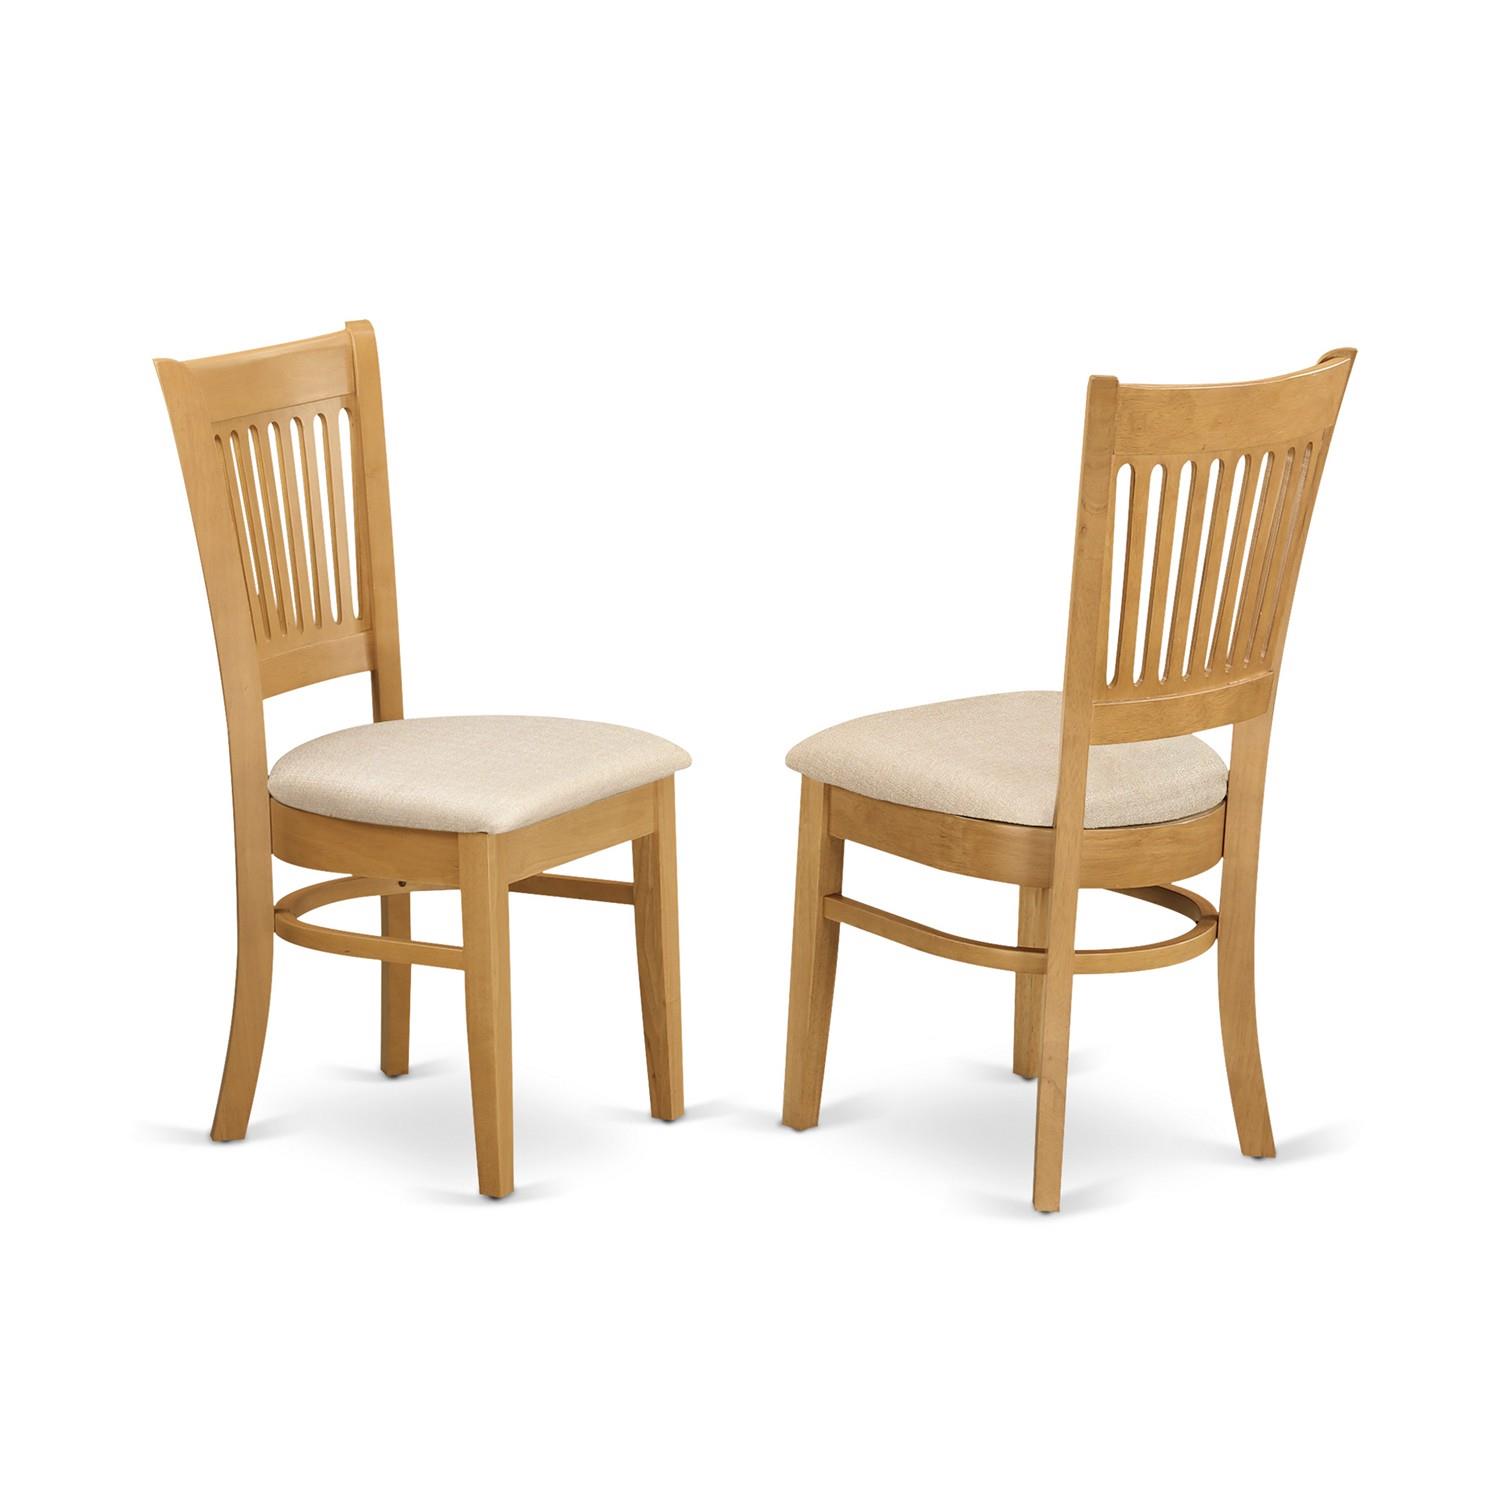 East West Furniture Set of 2 Chairs VAC-OAK-C Vancouver Microfiber Upholstered Seat Dining Chairs - Oak Finish